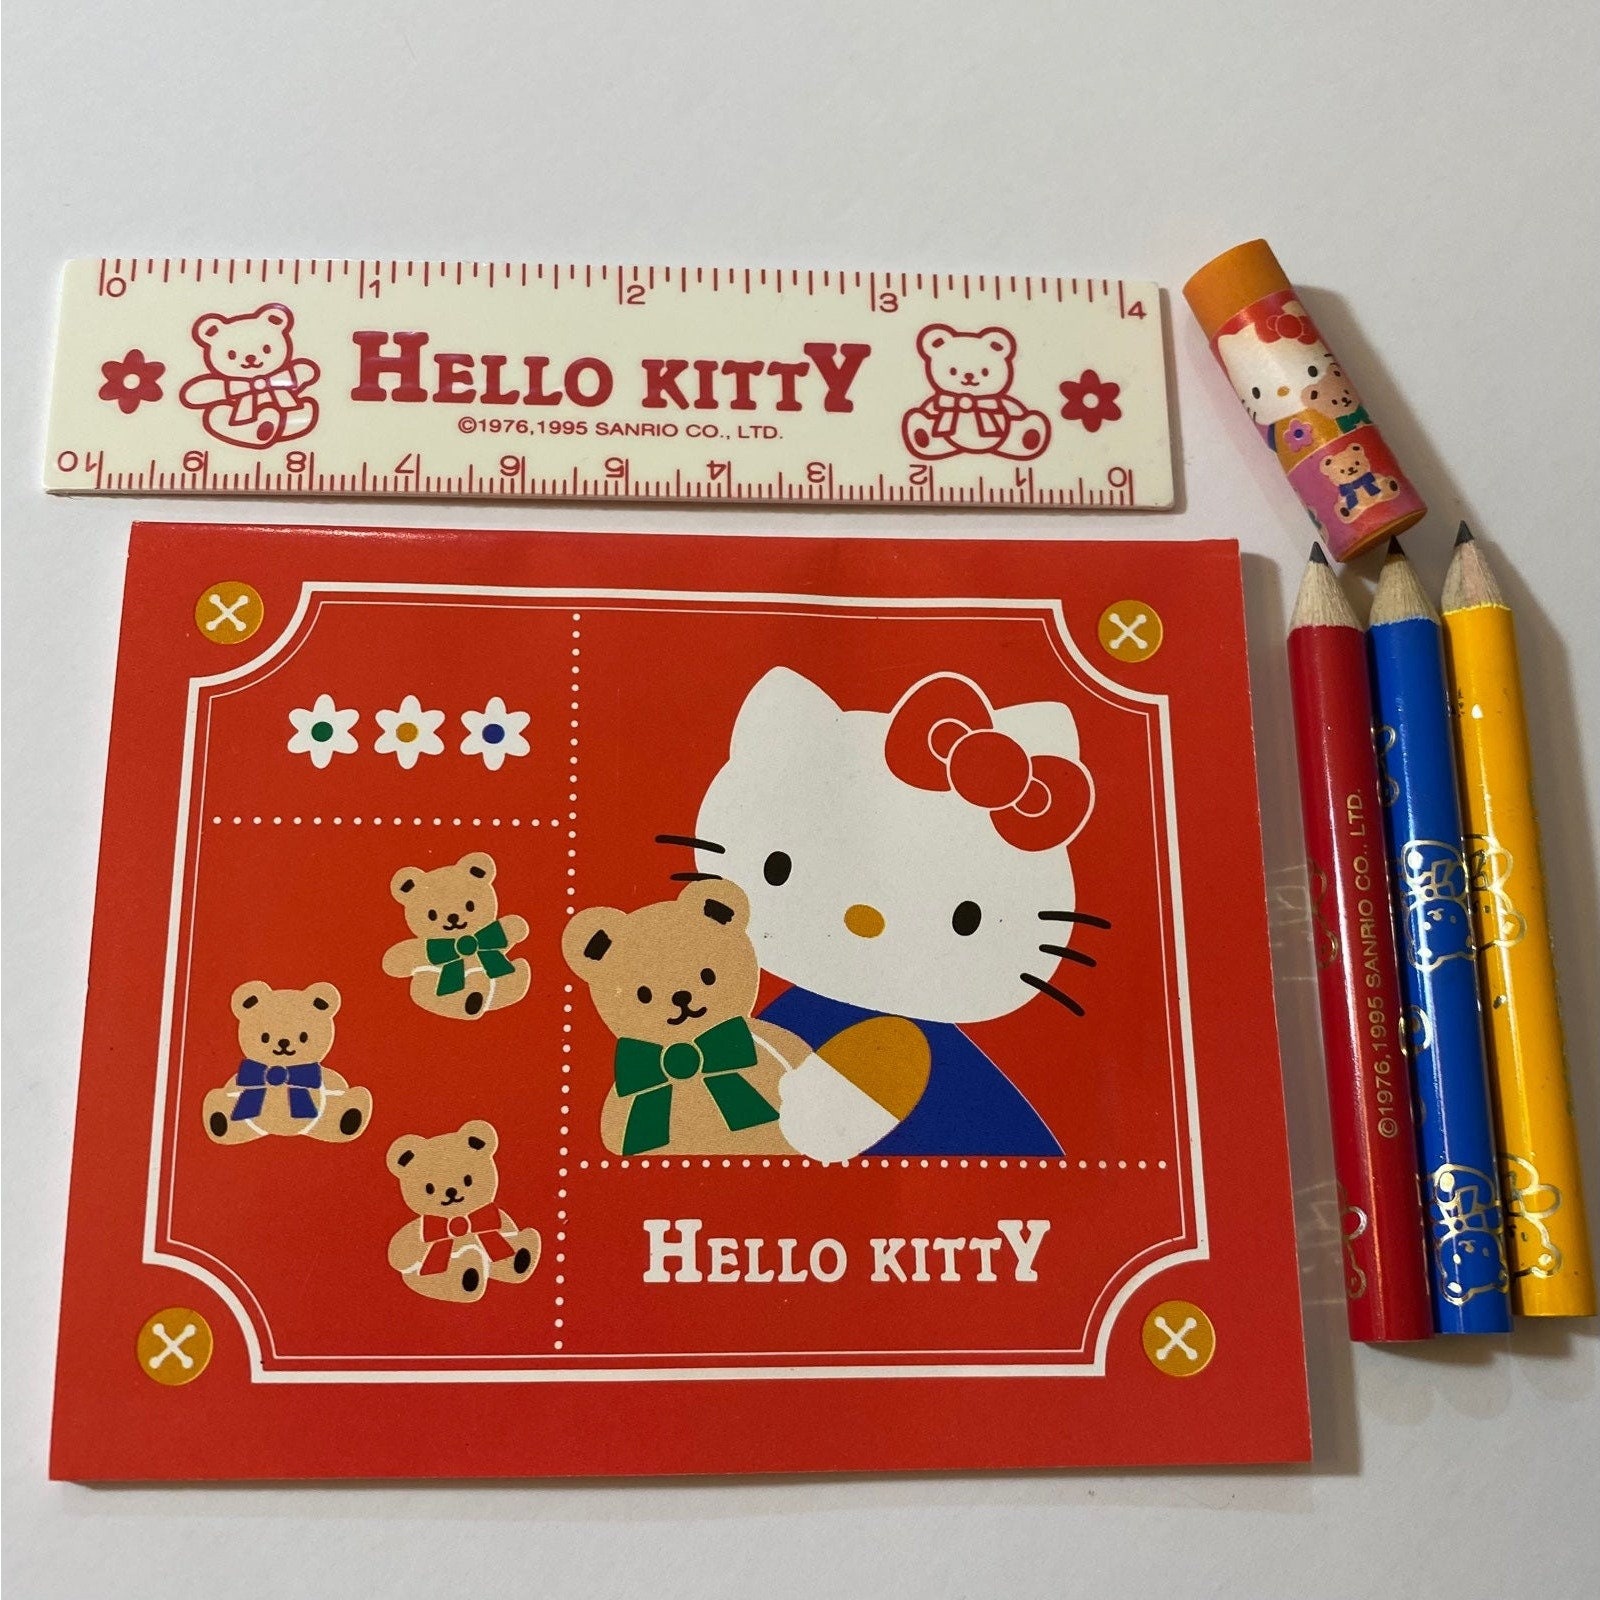 Free: Hello Kitty Mini Collectible Stationary Set - Office Supplies -   Auctions for Free Stuff